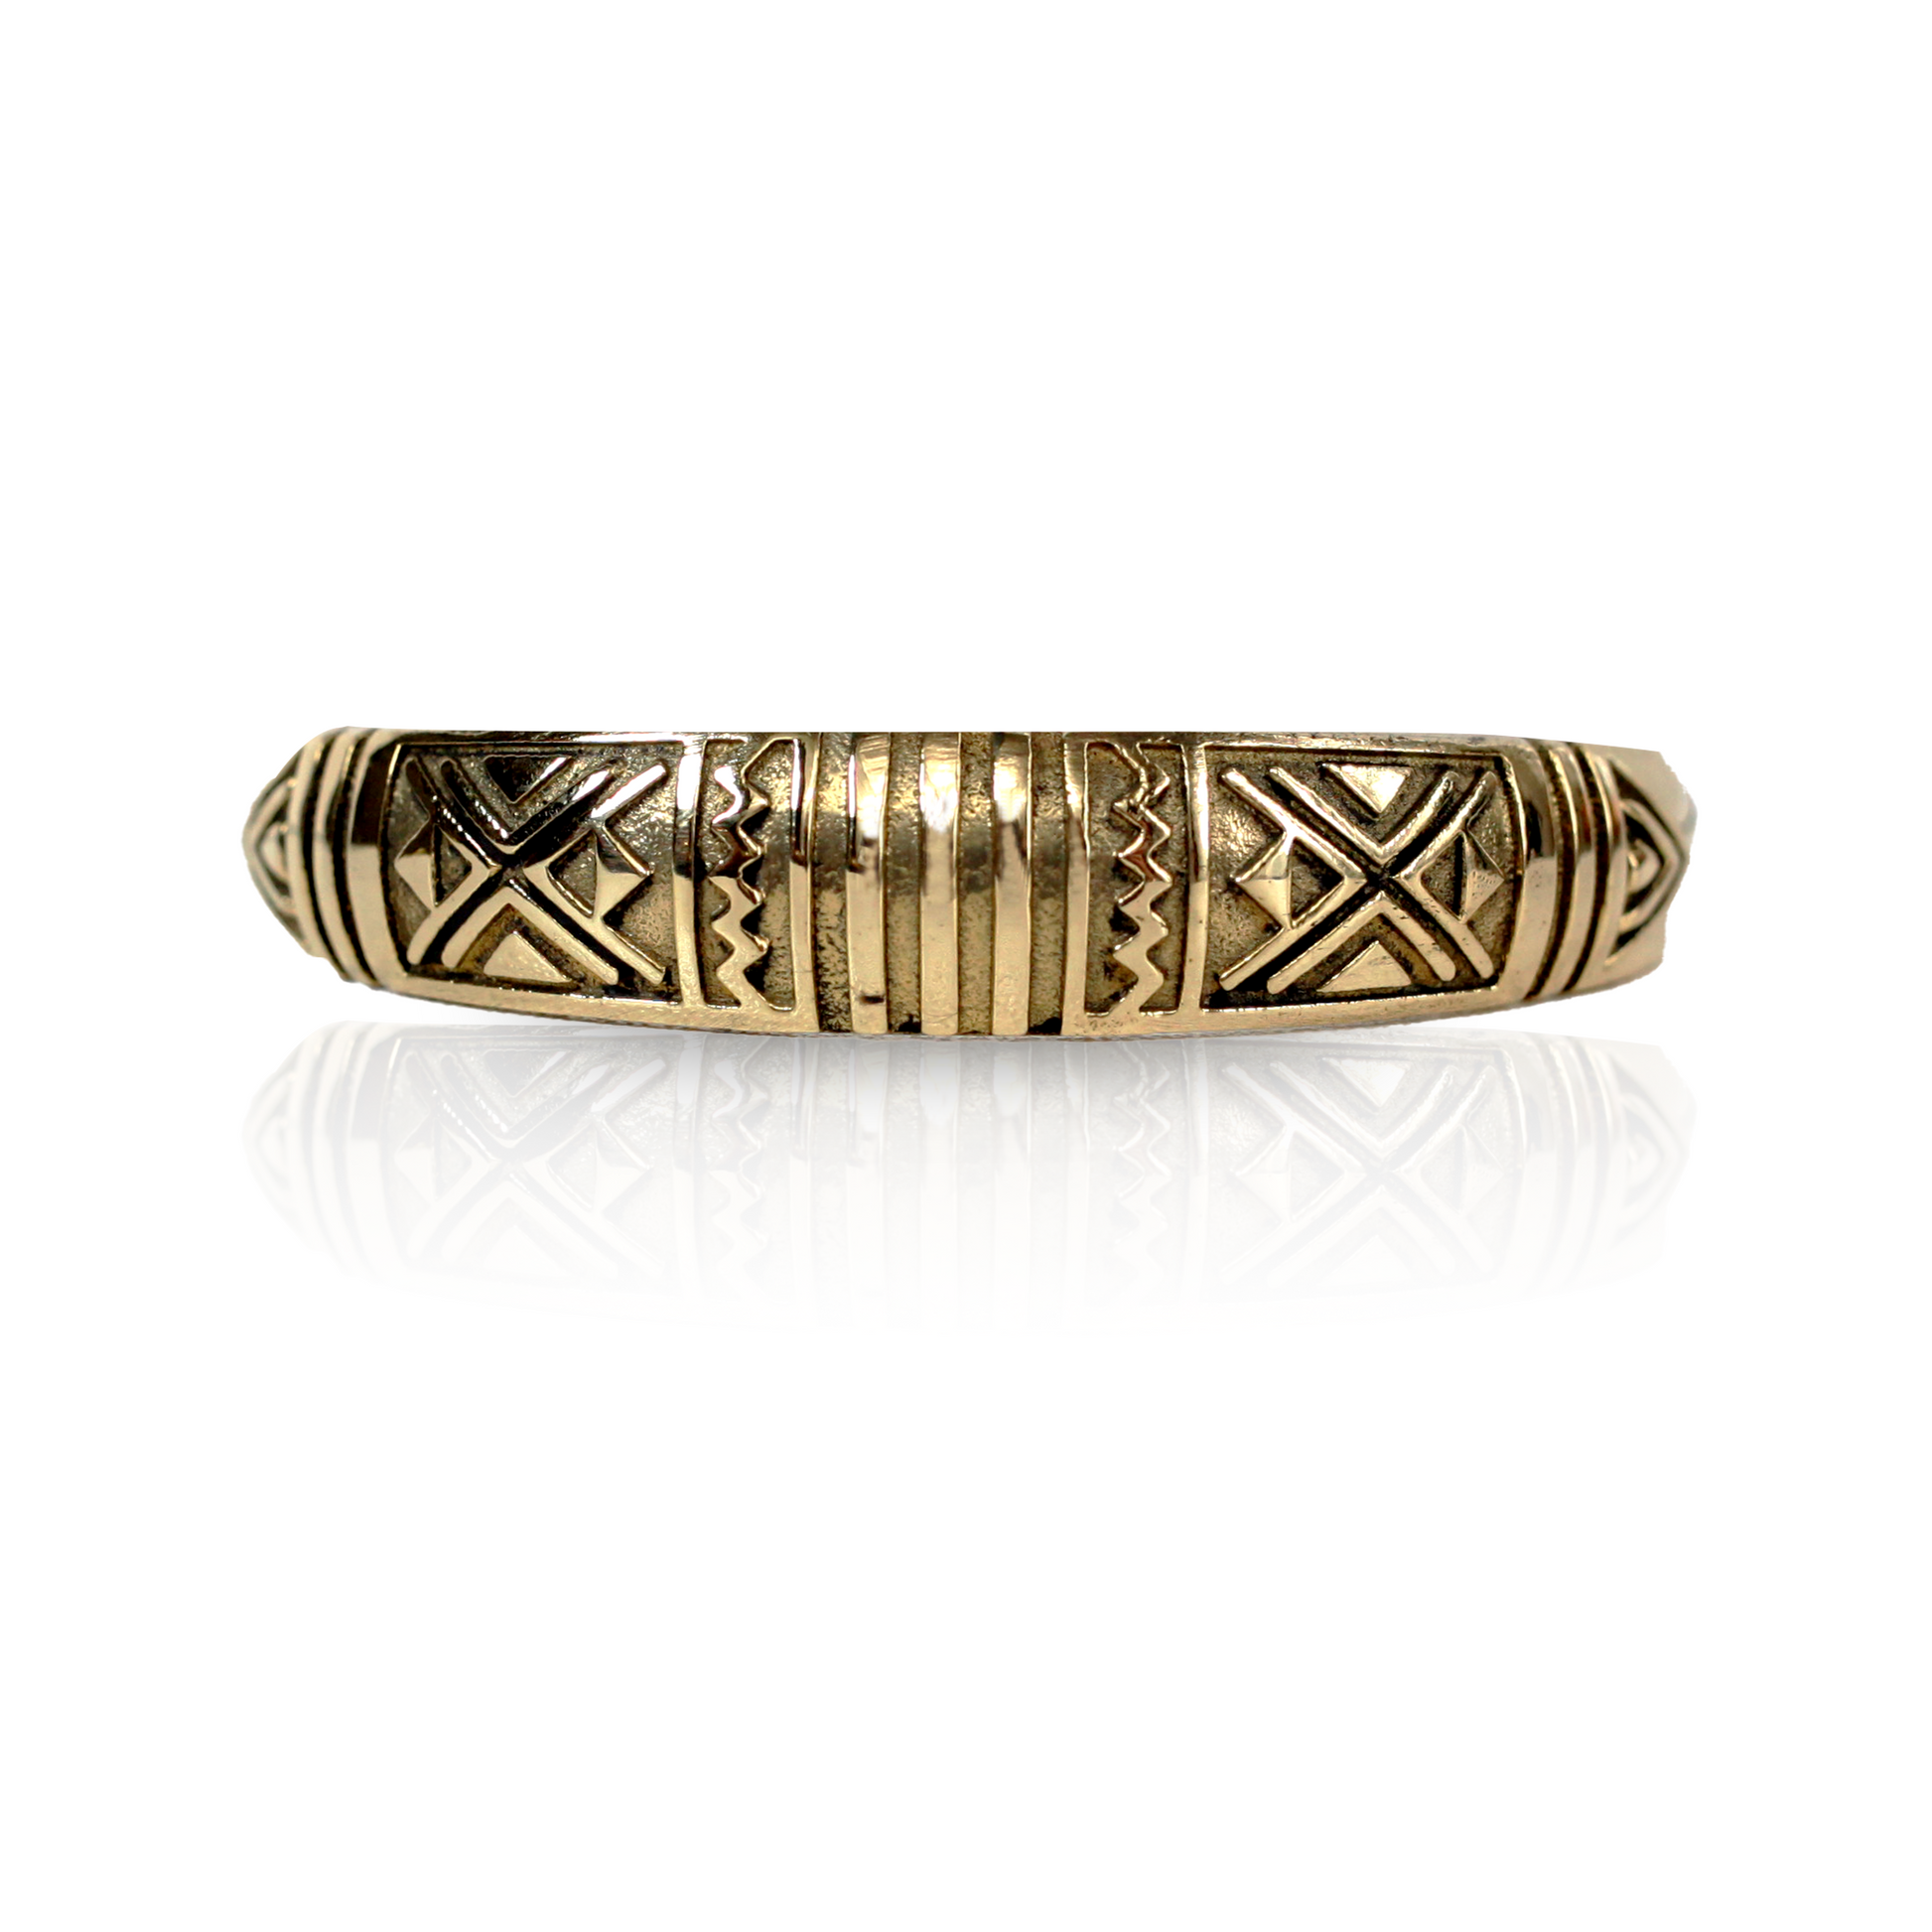 Brass cuff bracelet with tribal designs etched into the bracelet. 